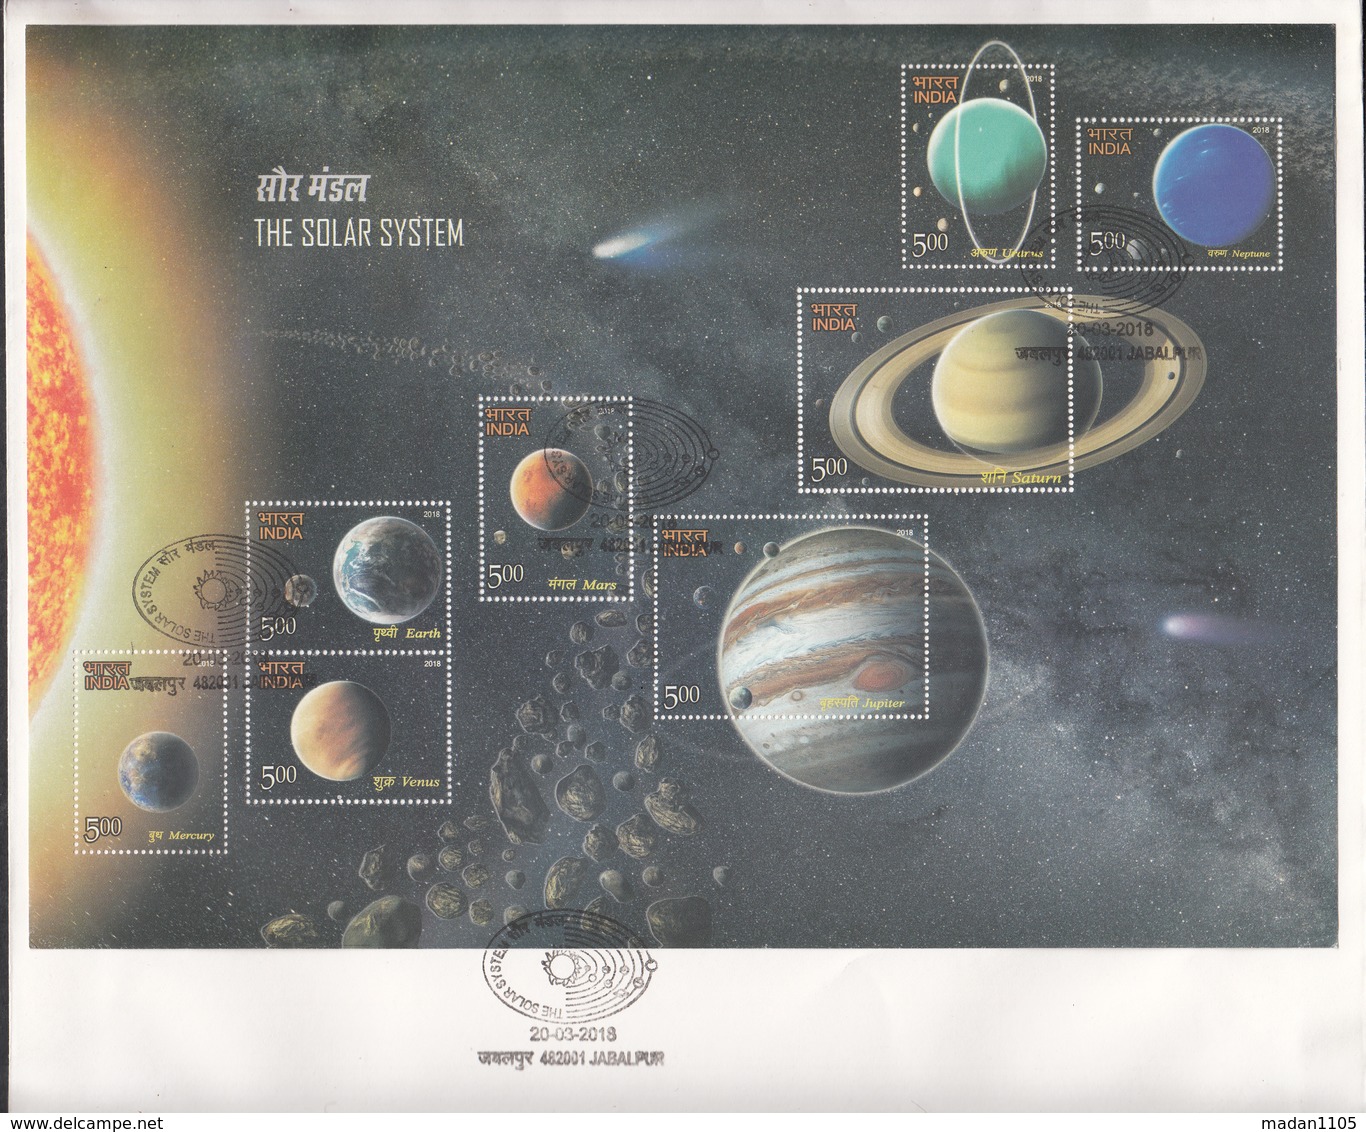 INDIA 2018 SOLAR SYSTEM MS FDC, Miniature Sheet  On PLAIN COVER Jabalpur Cancelled - FDC